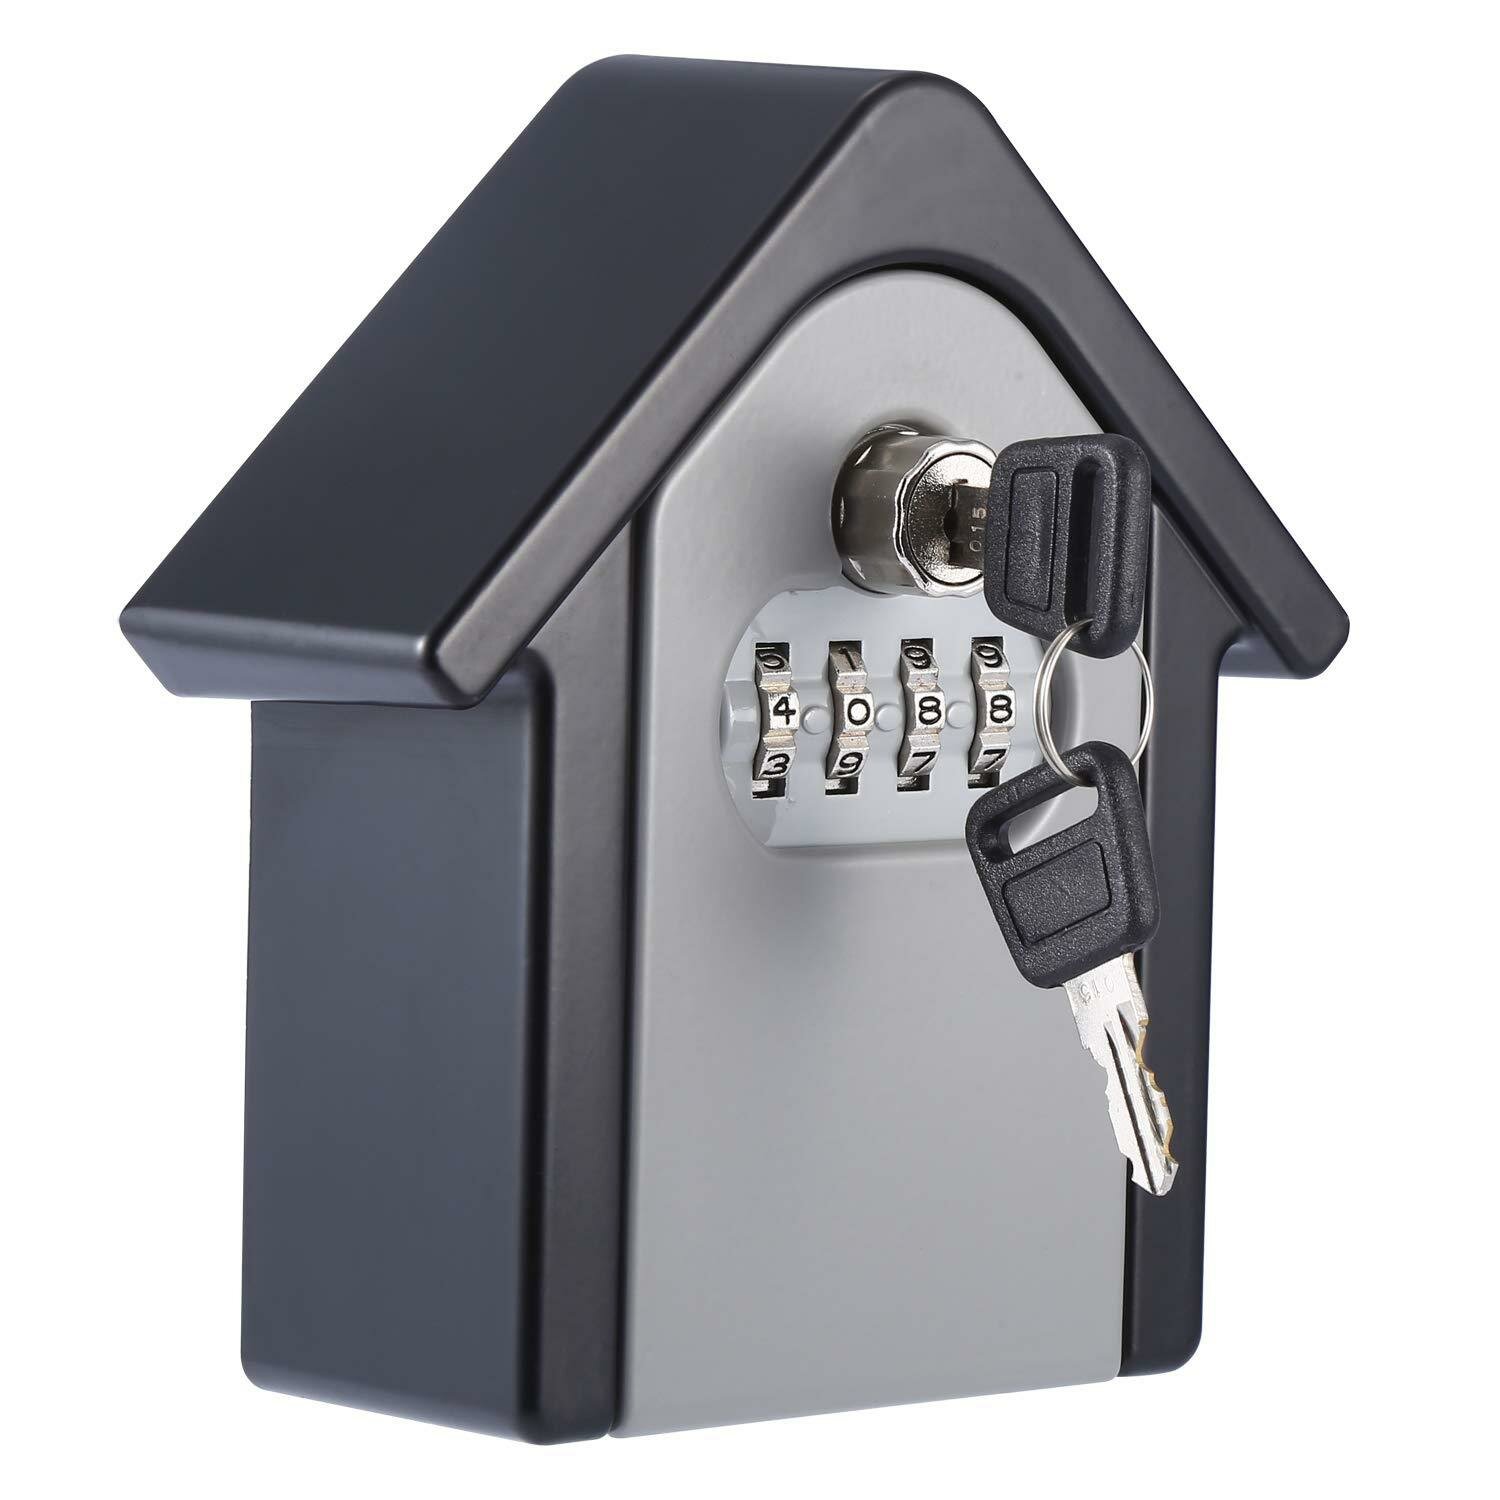 

Keybox Lock Key Safe Box Outdoor Wall Mount Combination Password Lock Hidden Keys Storage Box Security Safes For Home Of